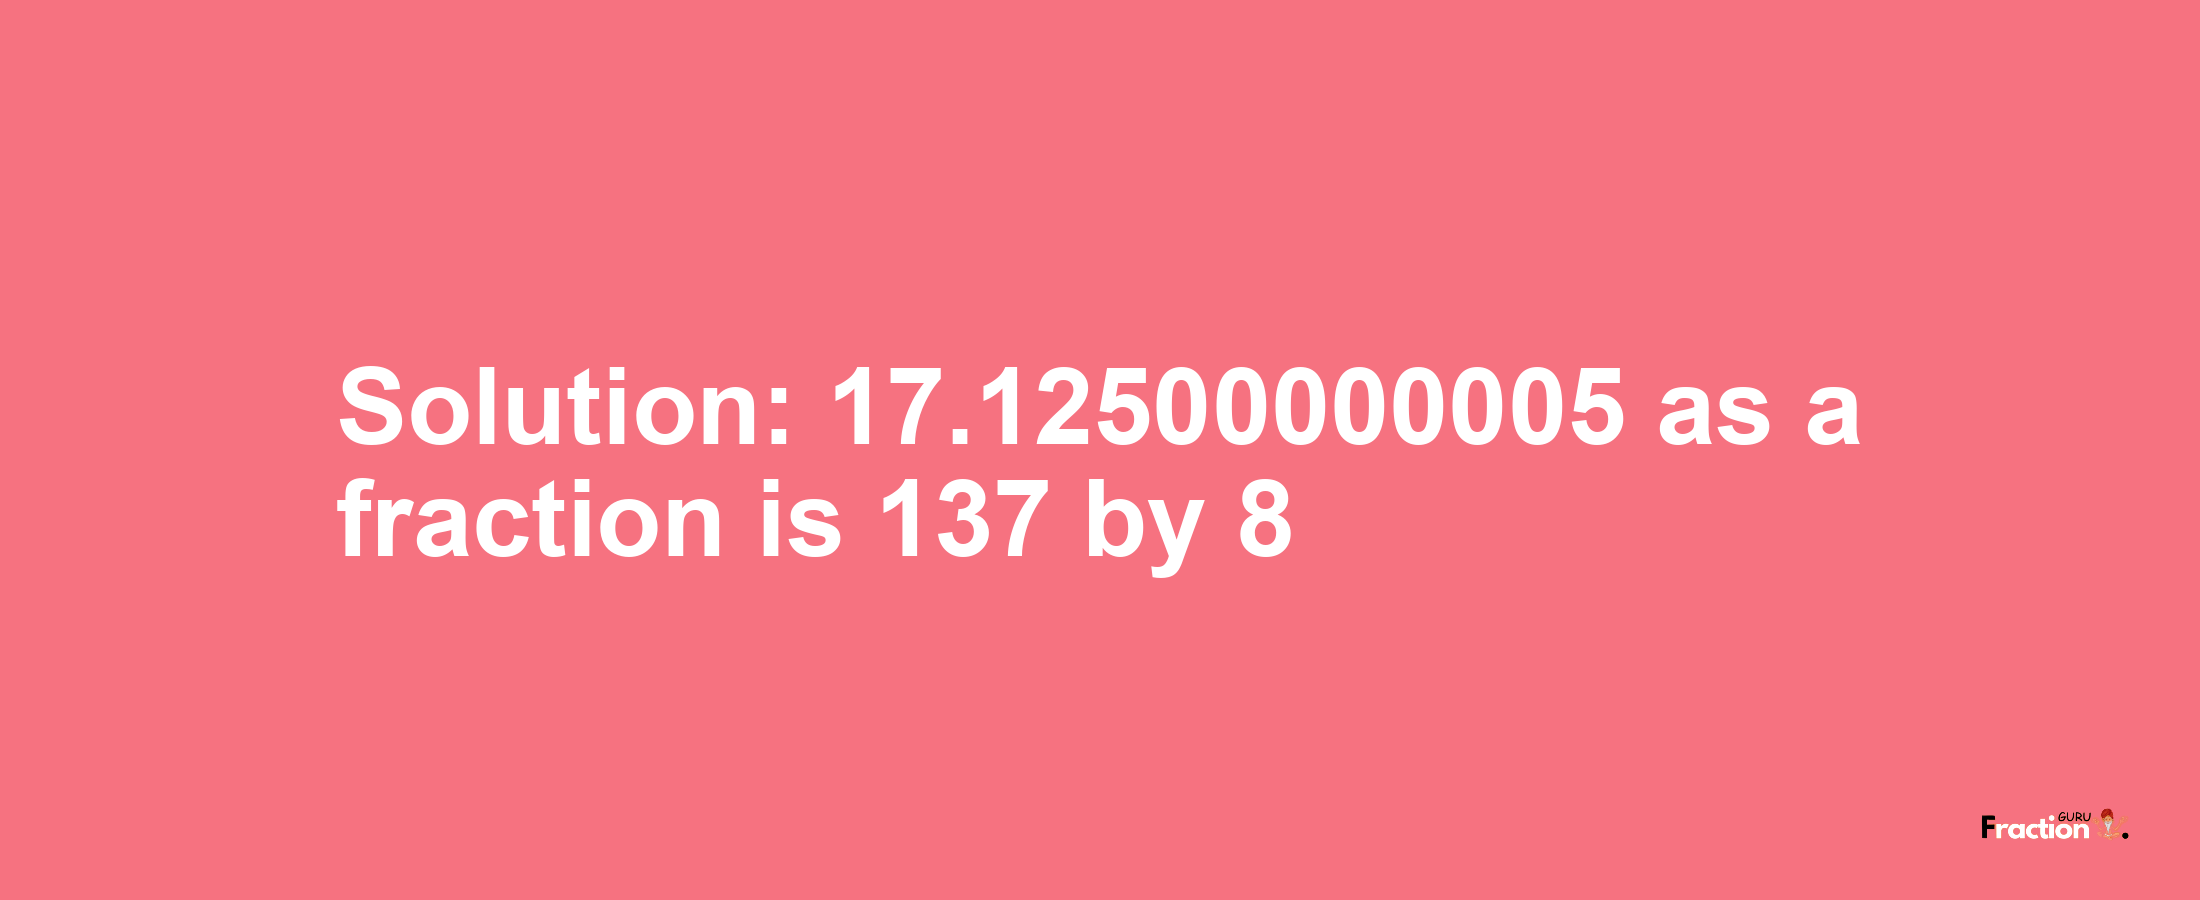 Solution:17.12500000005 as a fraction is 137/8